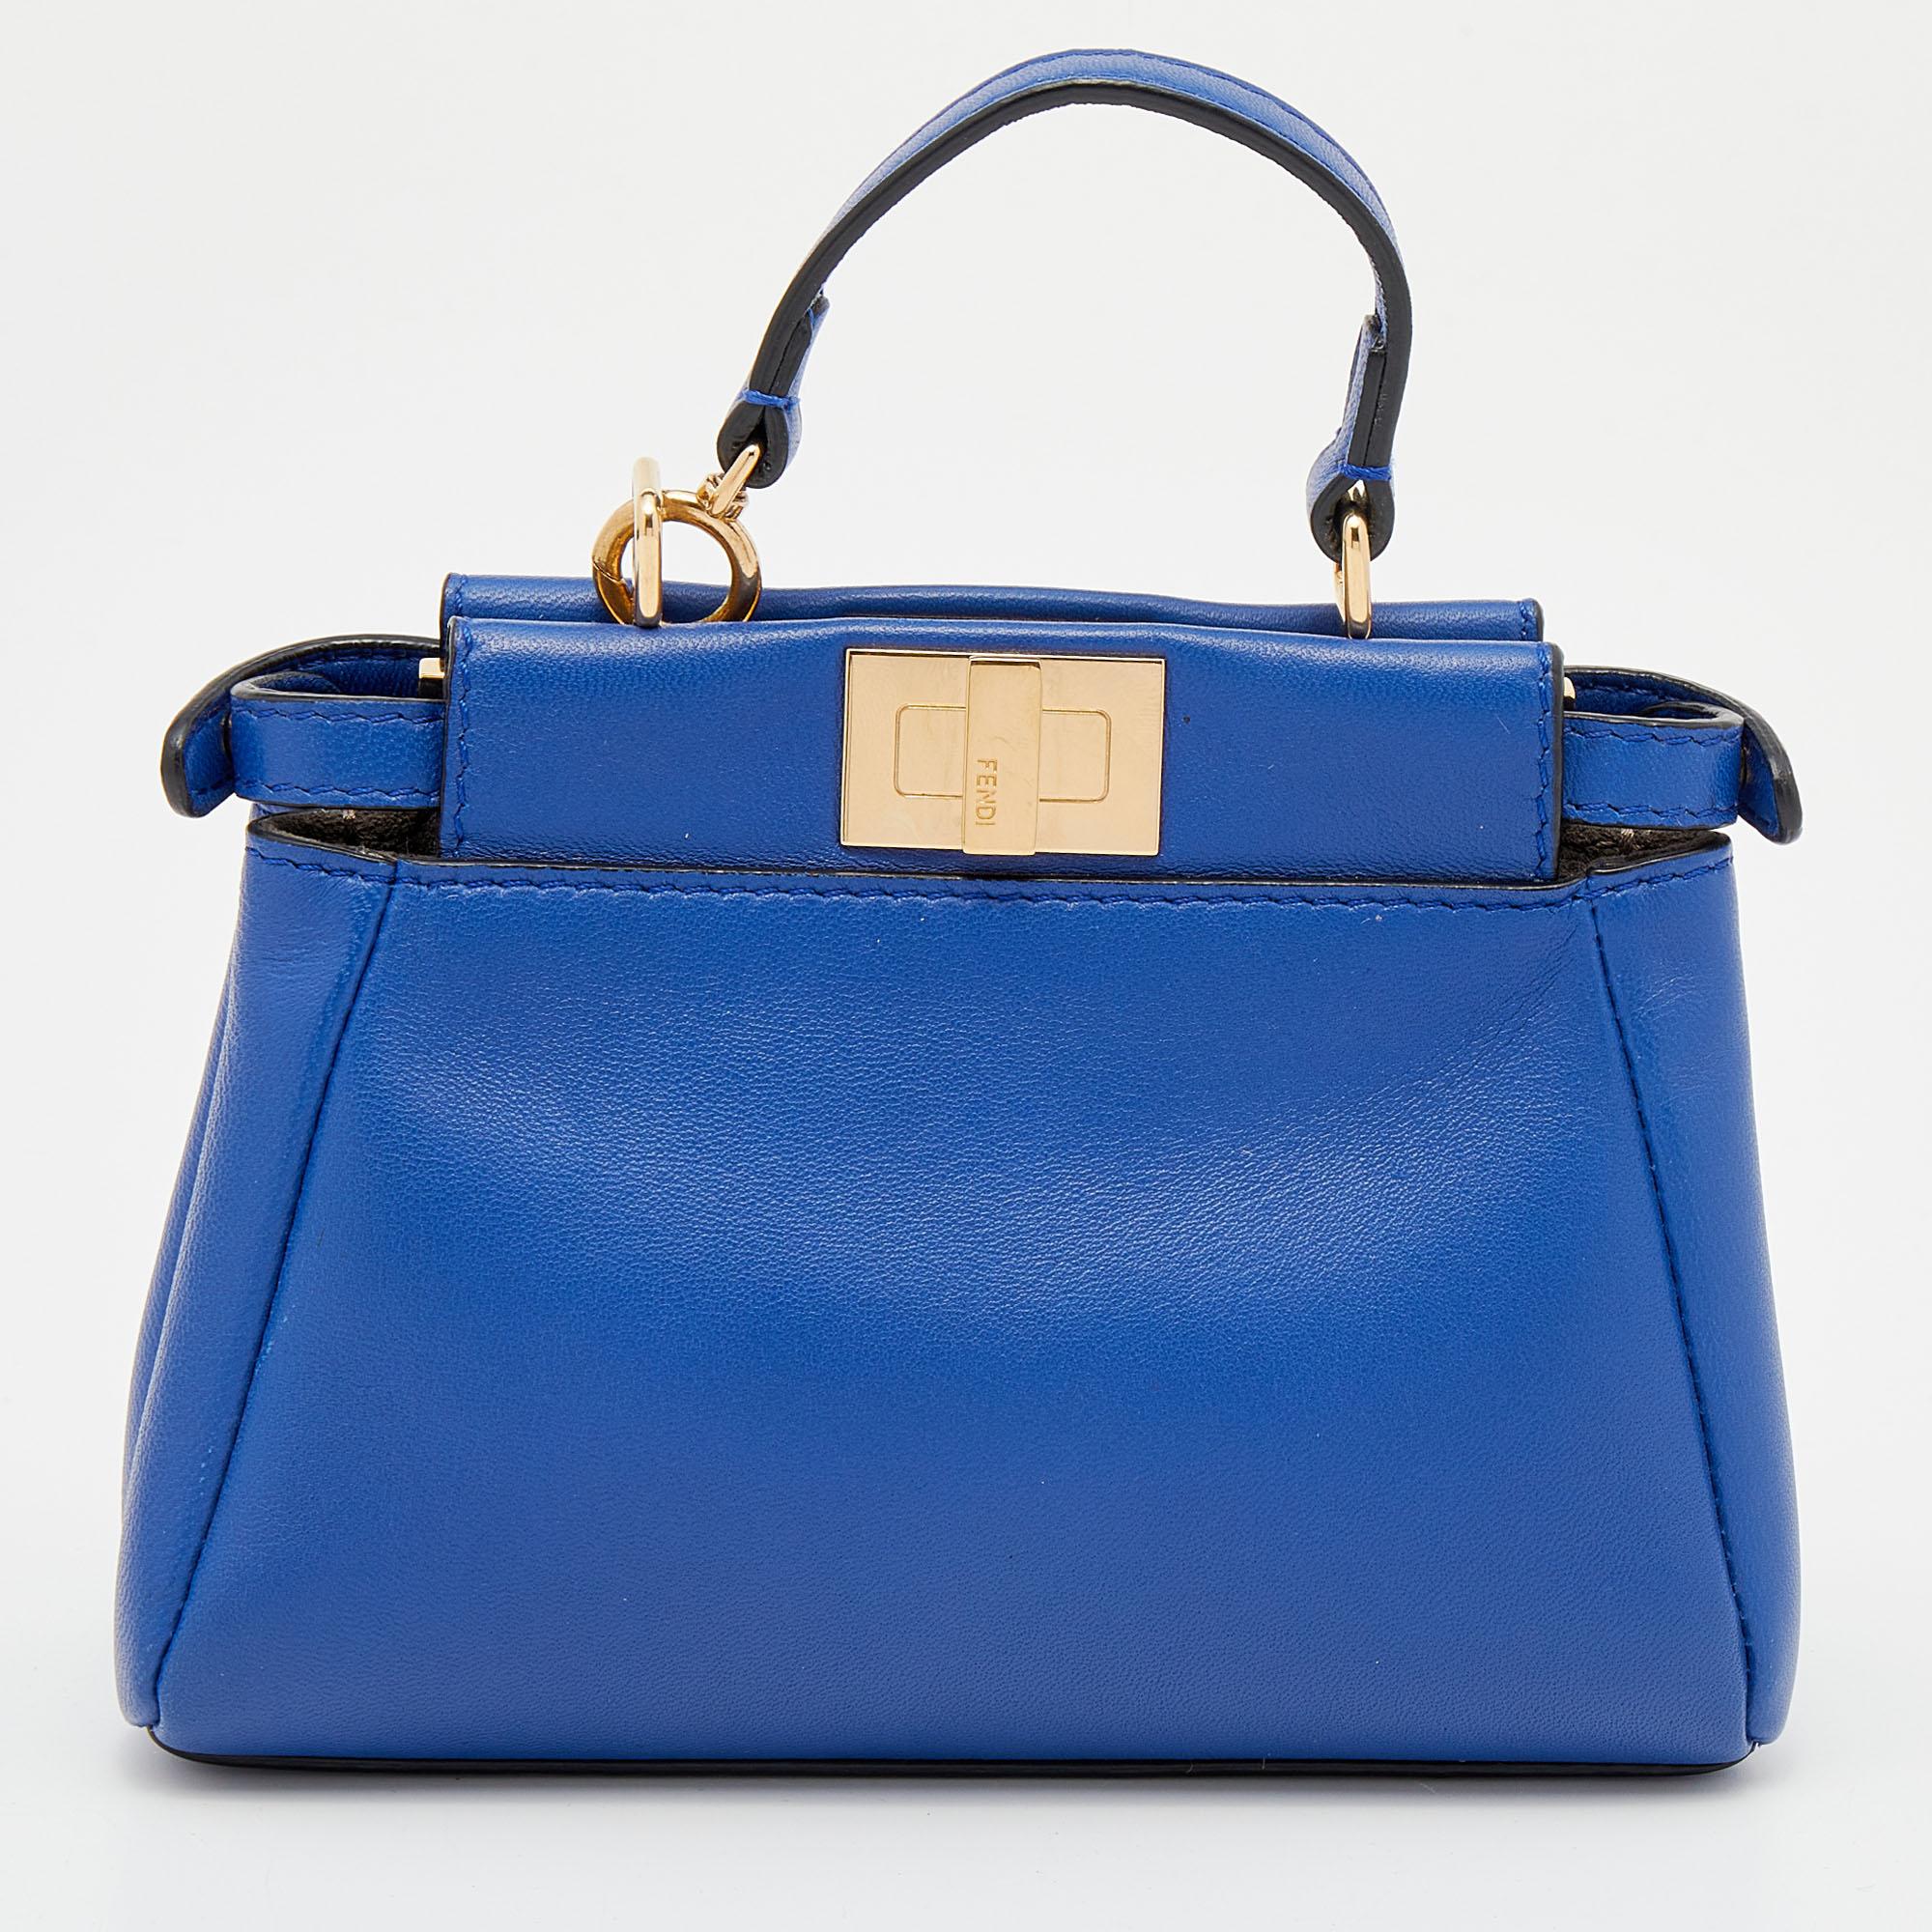 This exquisite Peekaboo from Fendi is highly coveted, and since its birth in 2009, it has swayed us with its shape, design, and beauty. This sized-down micro version comes meticulously crafted from leather and designed with a top handle for you to